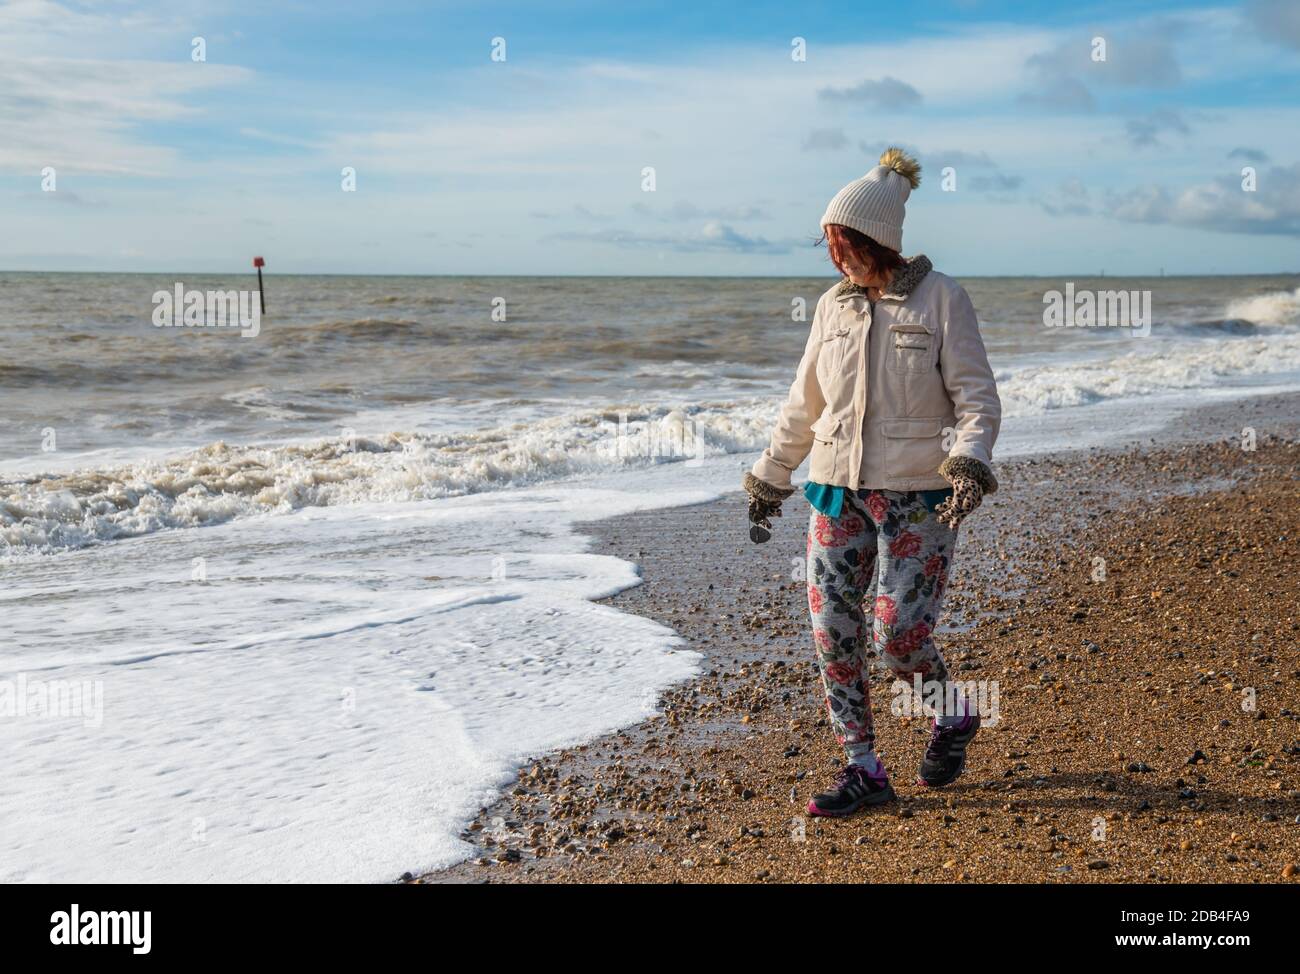 Senior woman dressed in coat, hat, gloves and trousers, walking on a beach by the sea in Autumn in the UK. Seafront ocean walk. Stock Photo